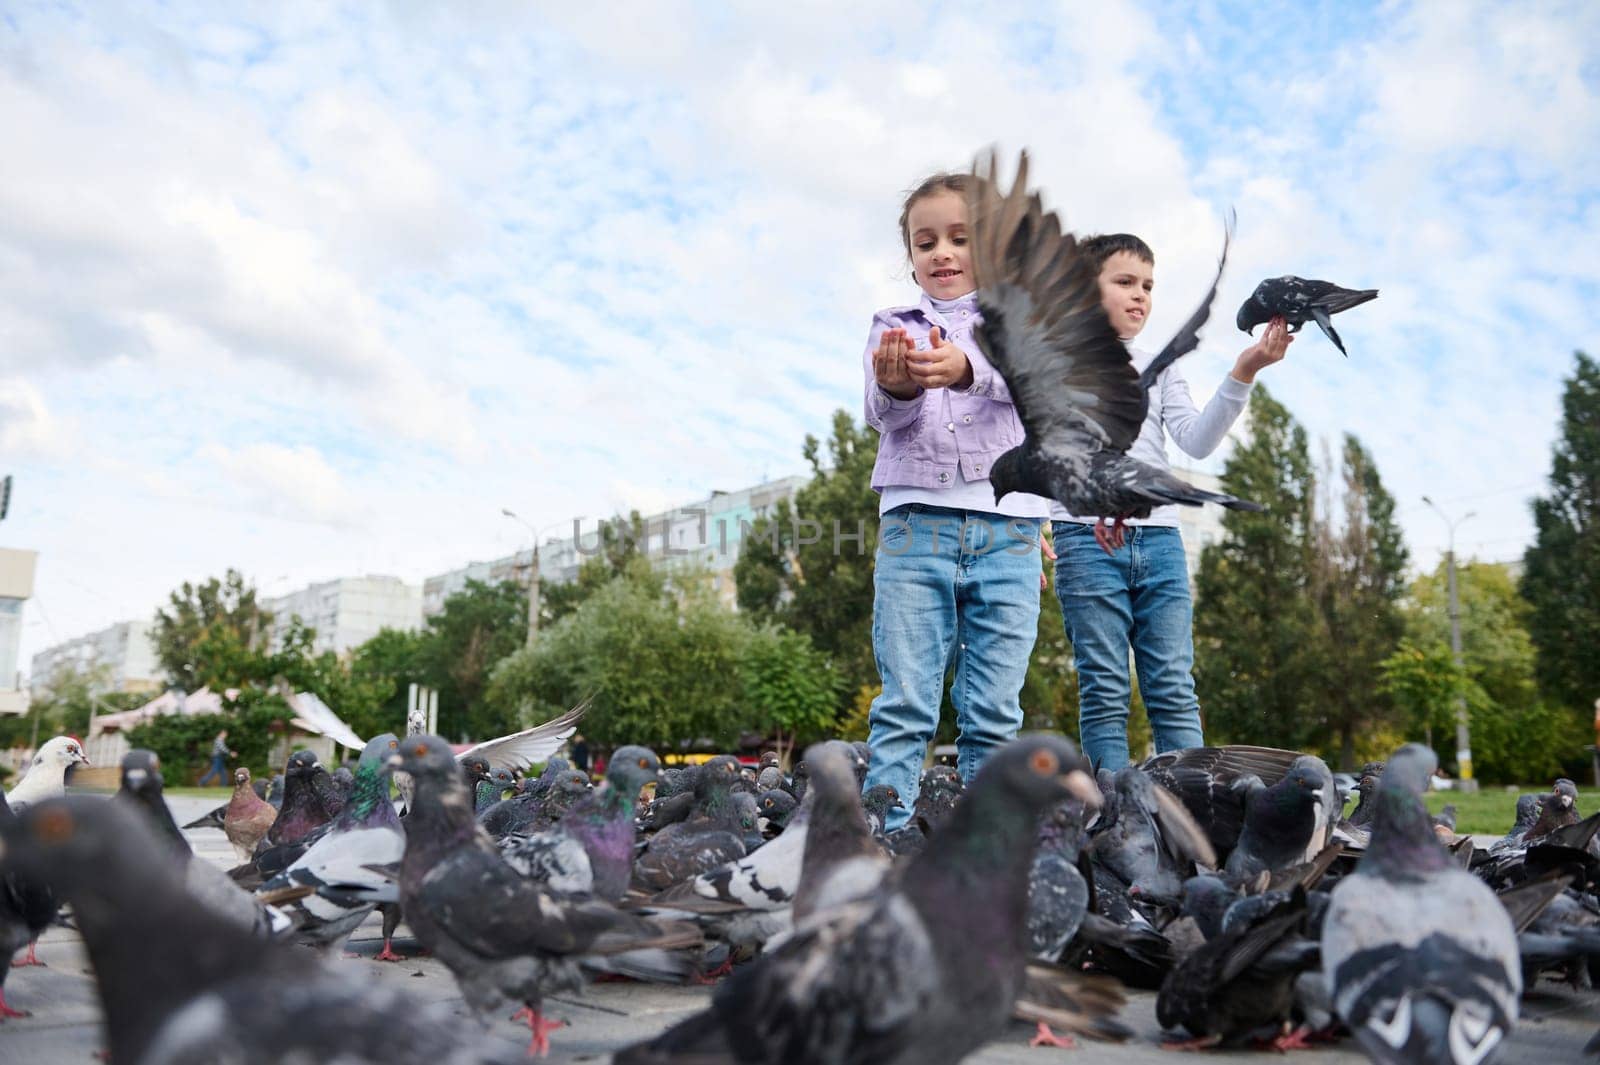 Adorable kids boy and girl, feeding rock pigeons crowding the street with discarded food in the city square by artgf